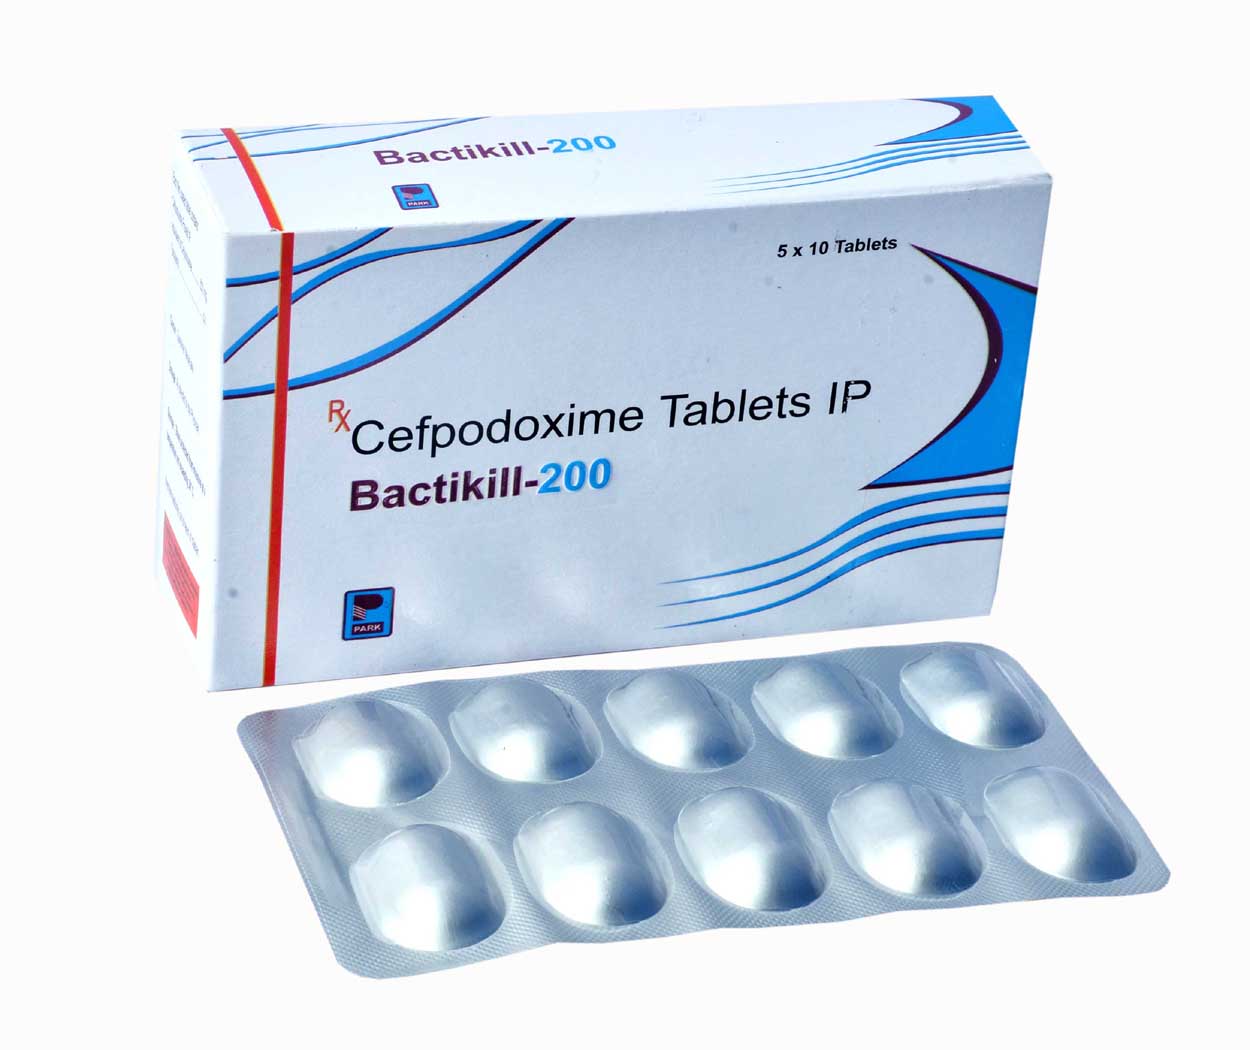 Product Name: Bactikill 200, Compositions of Bactikill 200 are Cefpodoxime Tablets IP - Park Pharmaceuticals